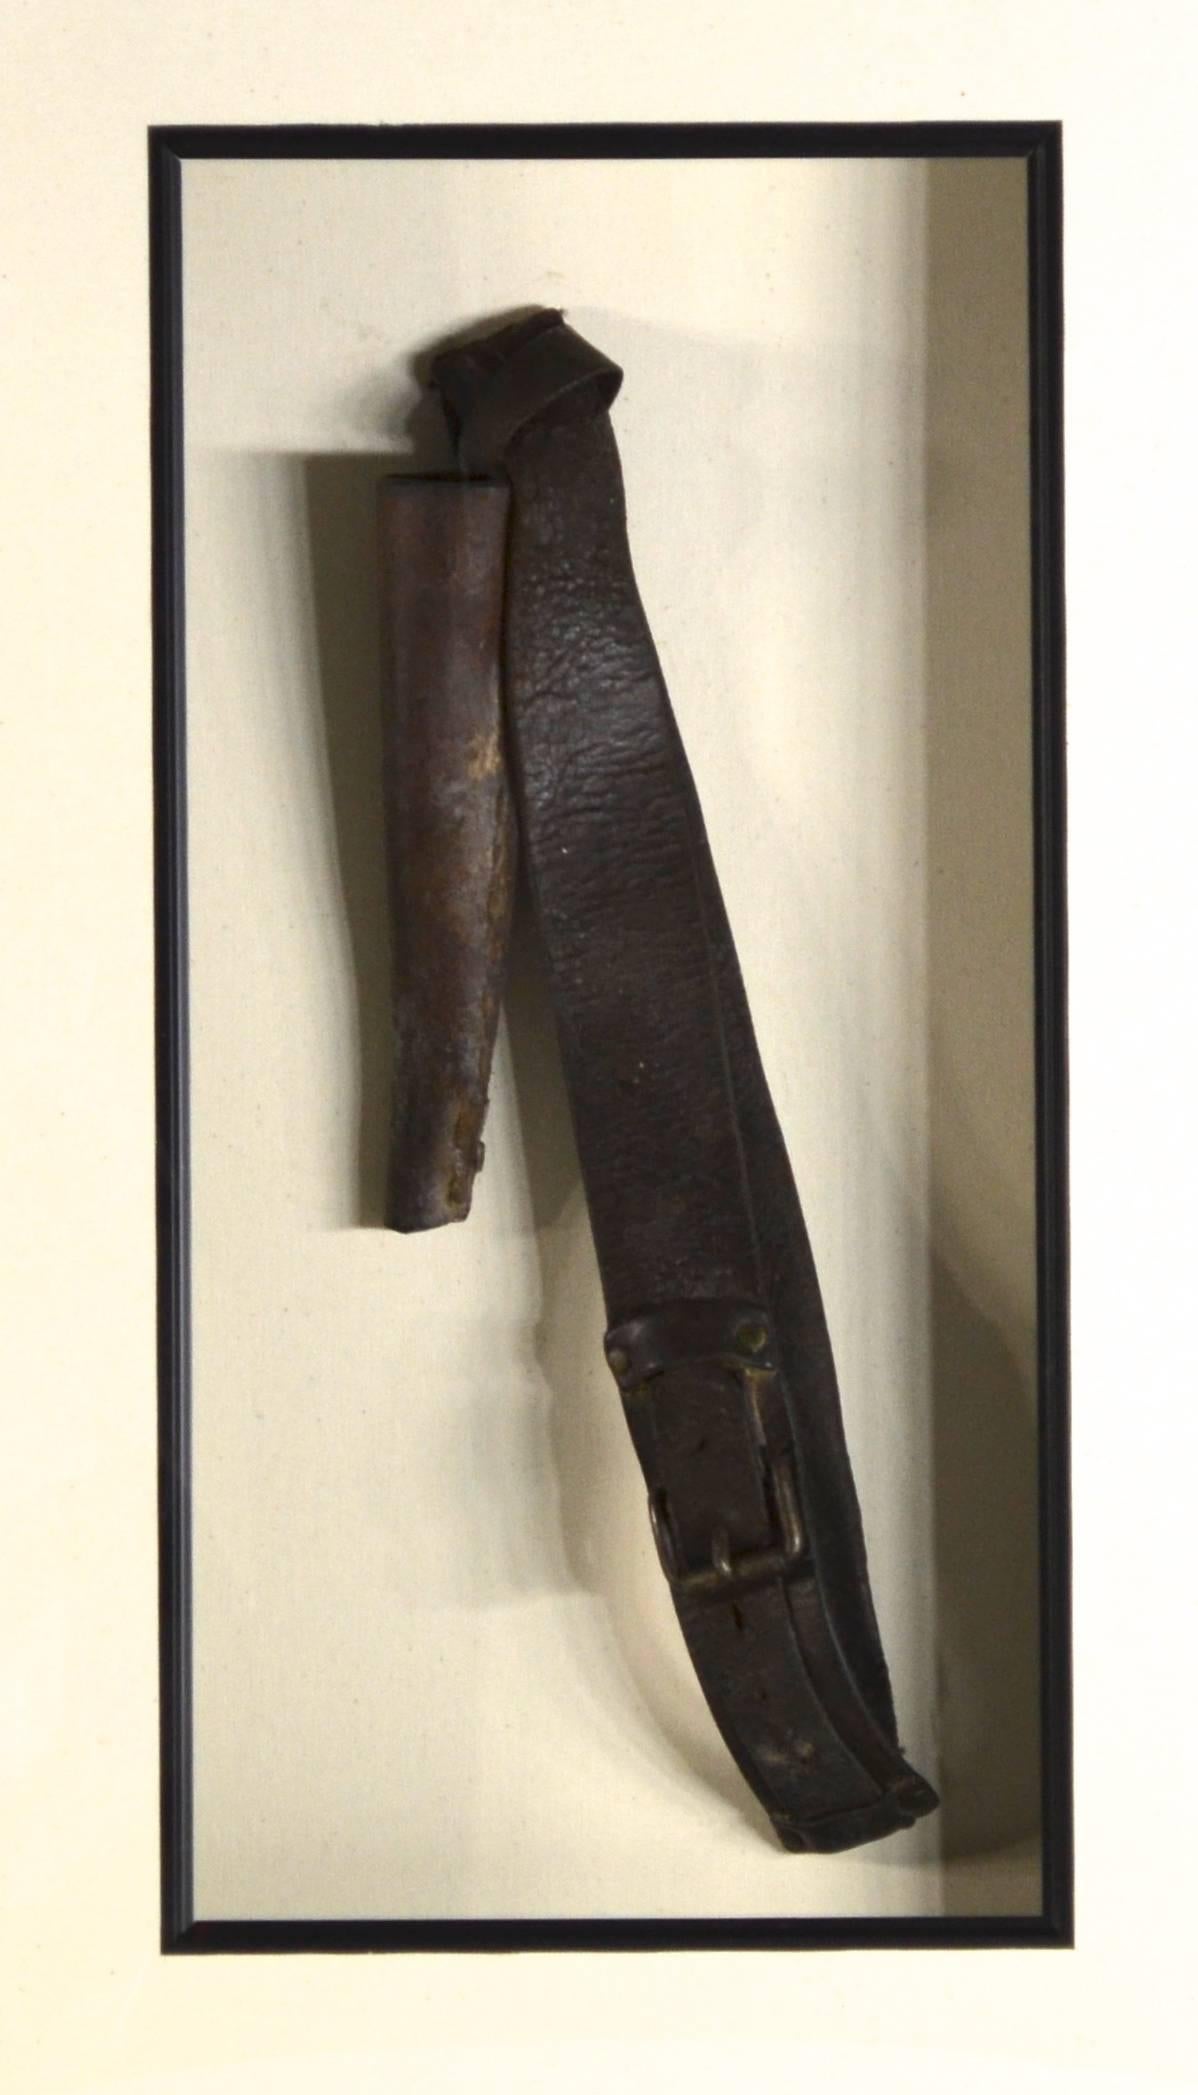 A rare Civil War flag bearers belt and flag staff holder. It is hand made of leather with hand stitching on the staff holster. Original belt buckle. In as found condition with museum framing and UV acrylic. I have had this in my personal collection